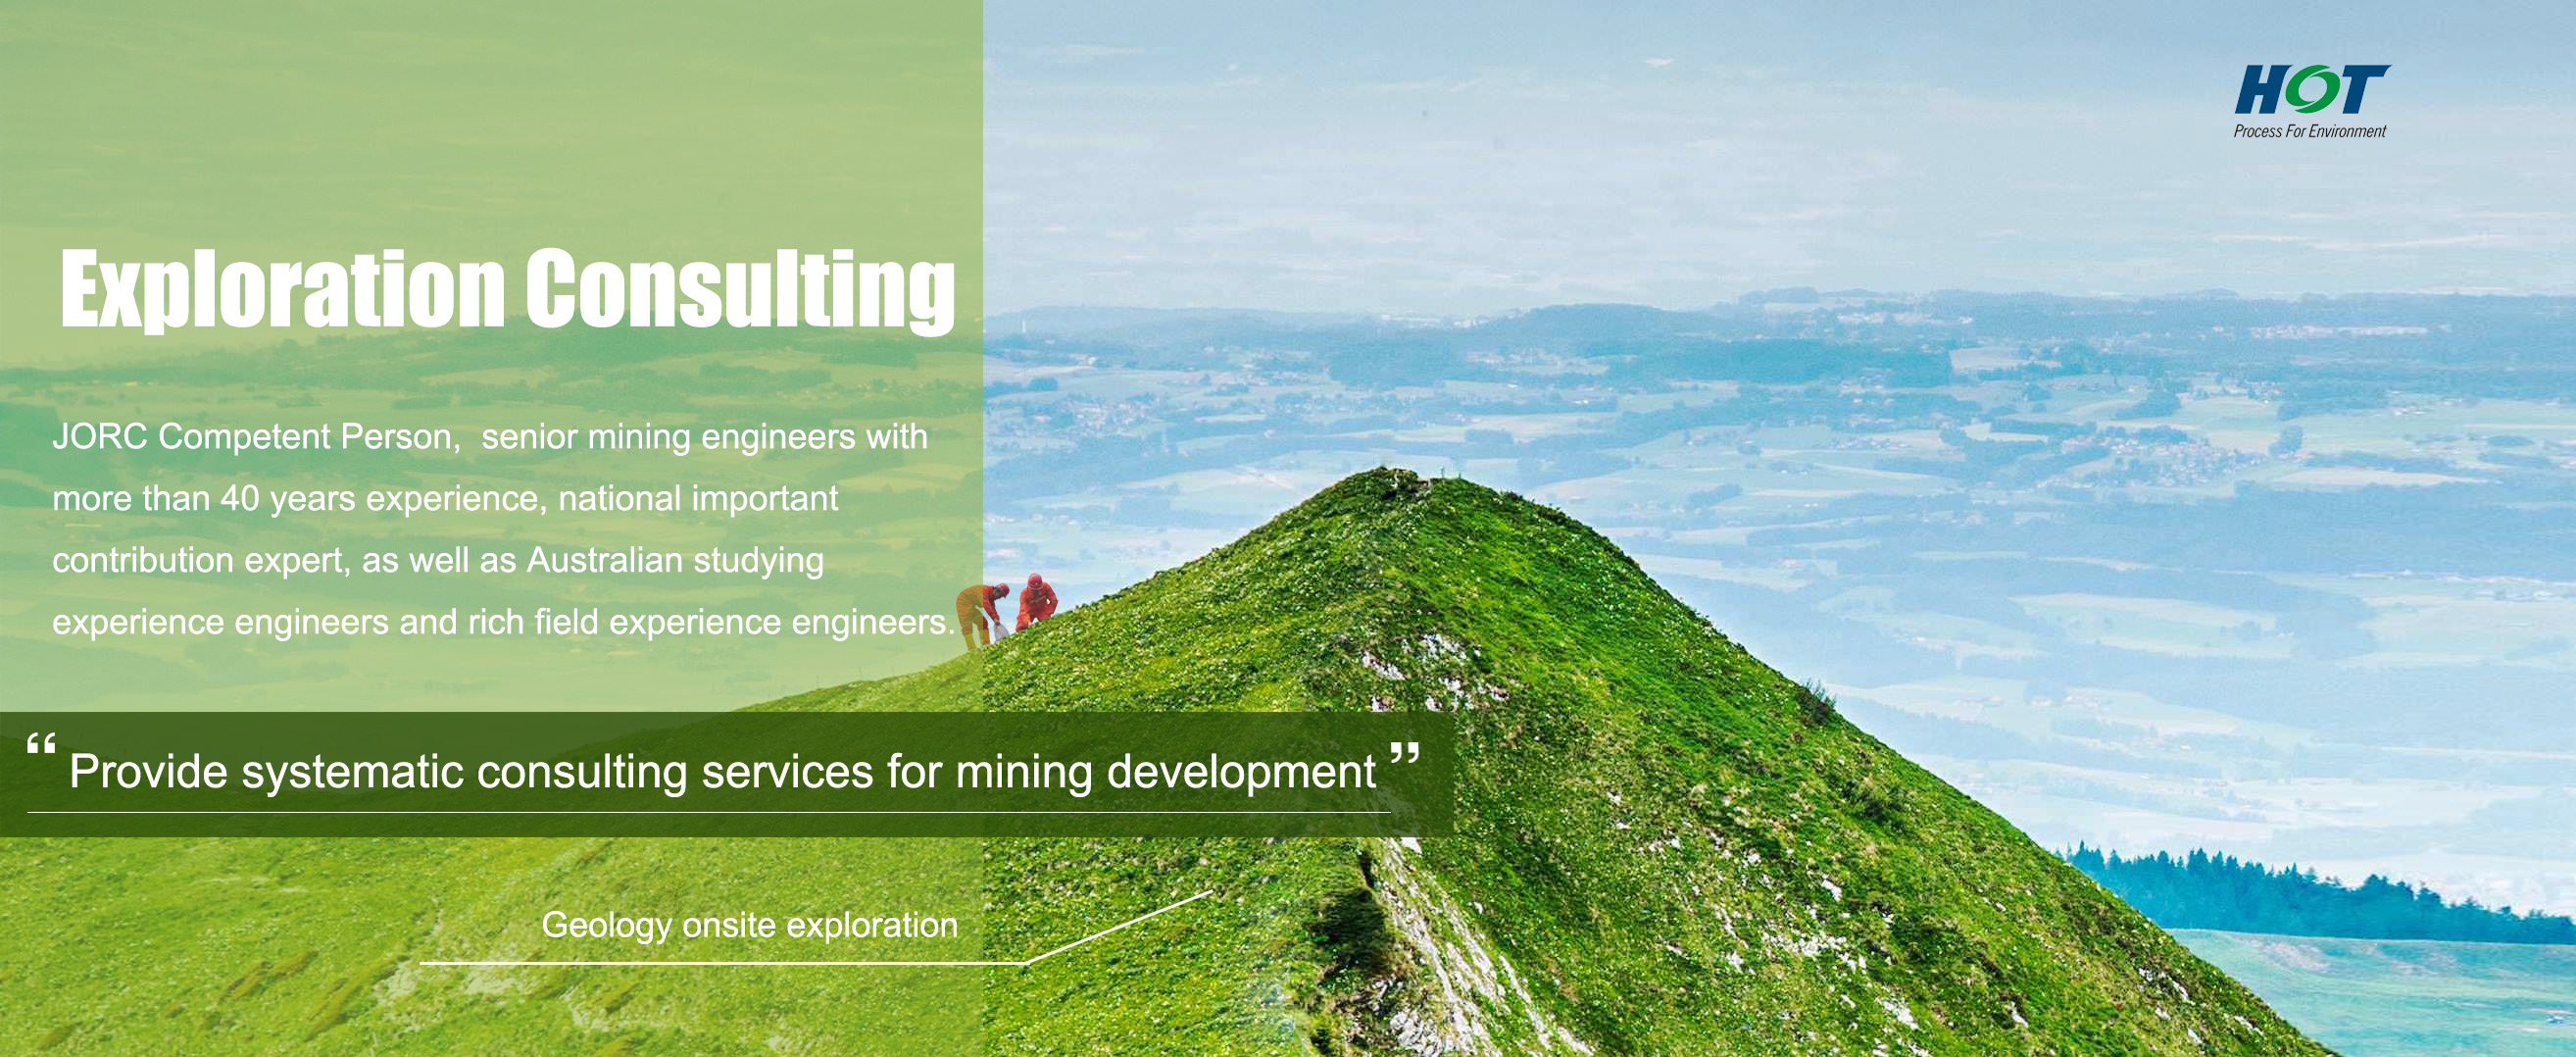 consulting geology HOT Mining Tech